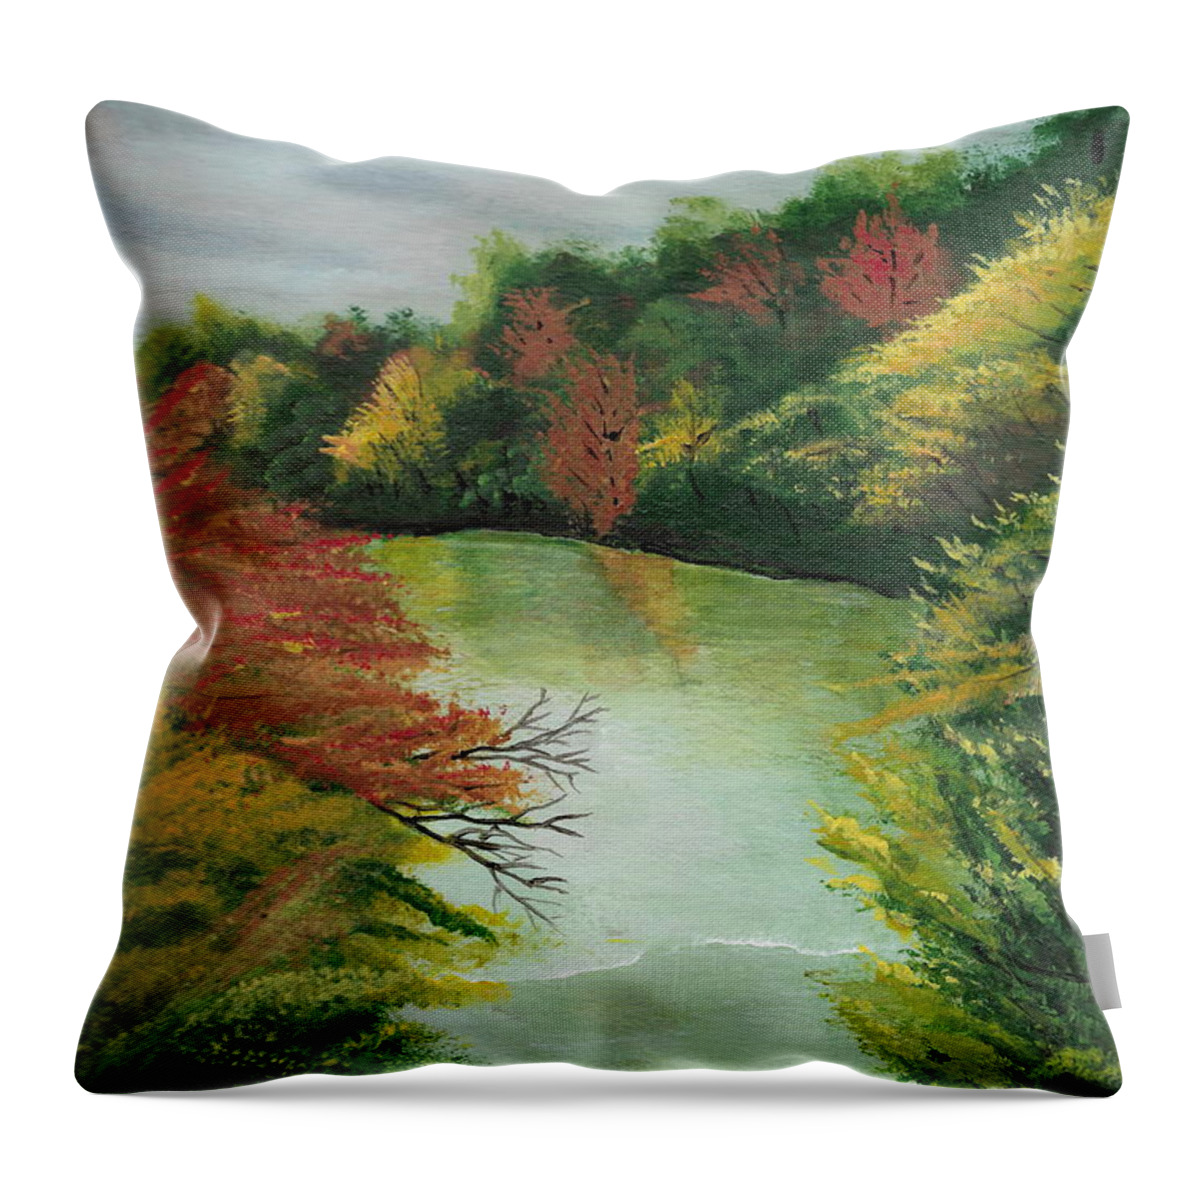 River Throw Pillow featuring the painting Autum River by David Bigelow